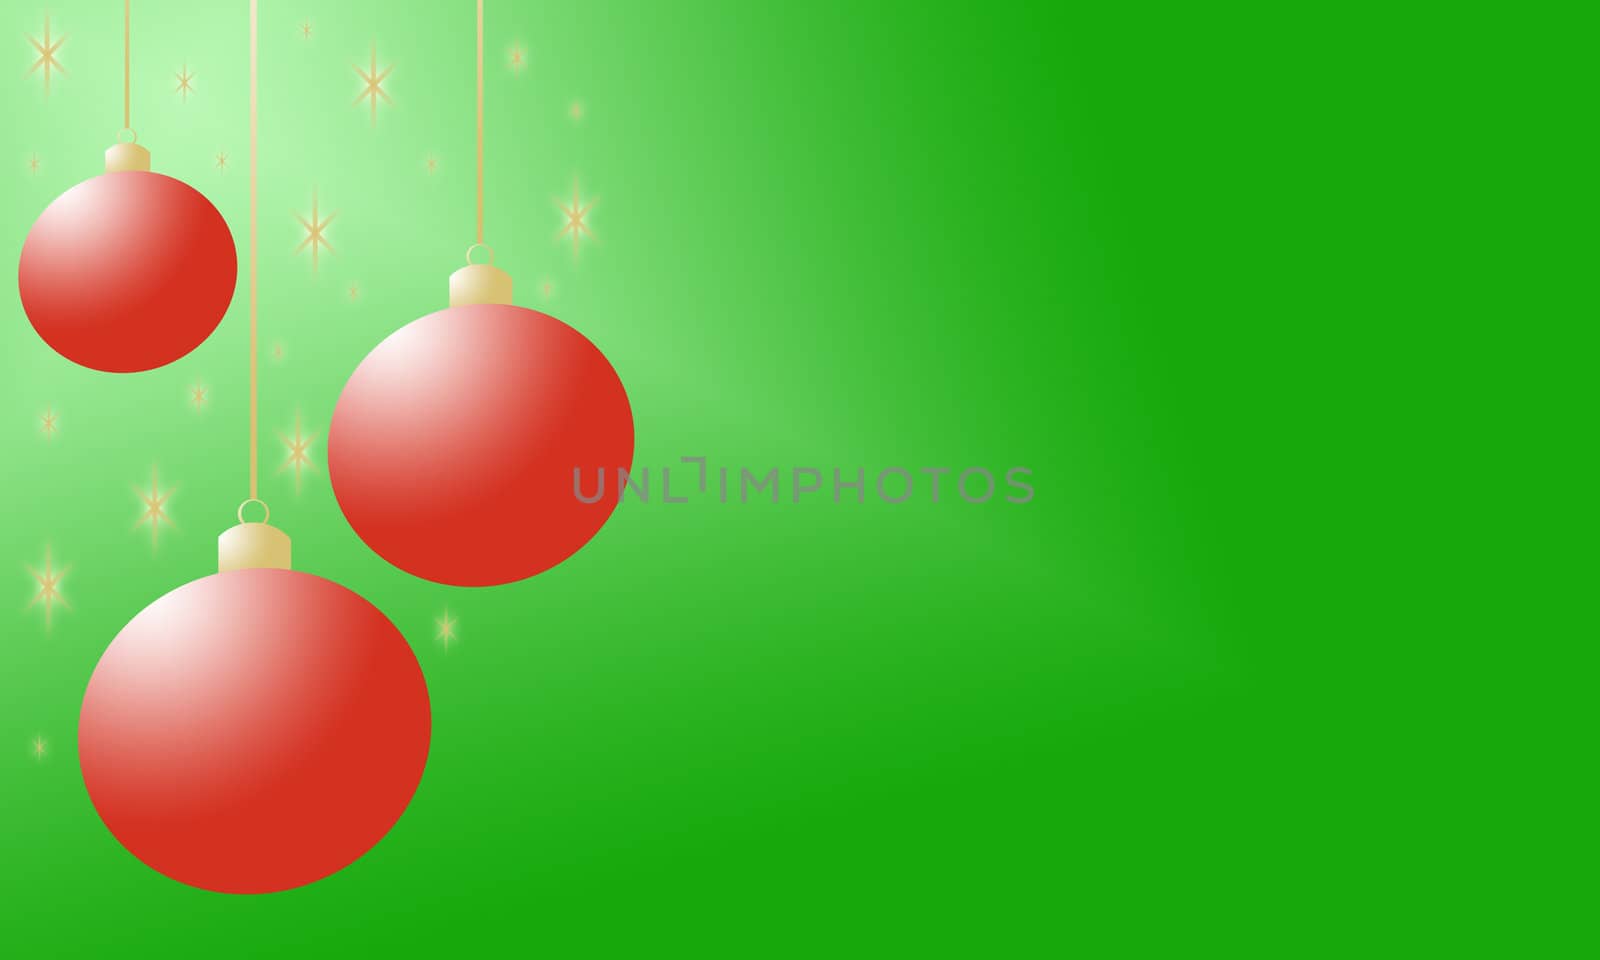 Green background with red Christmas ornaments and glowing gold s by ftlaudgirl